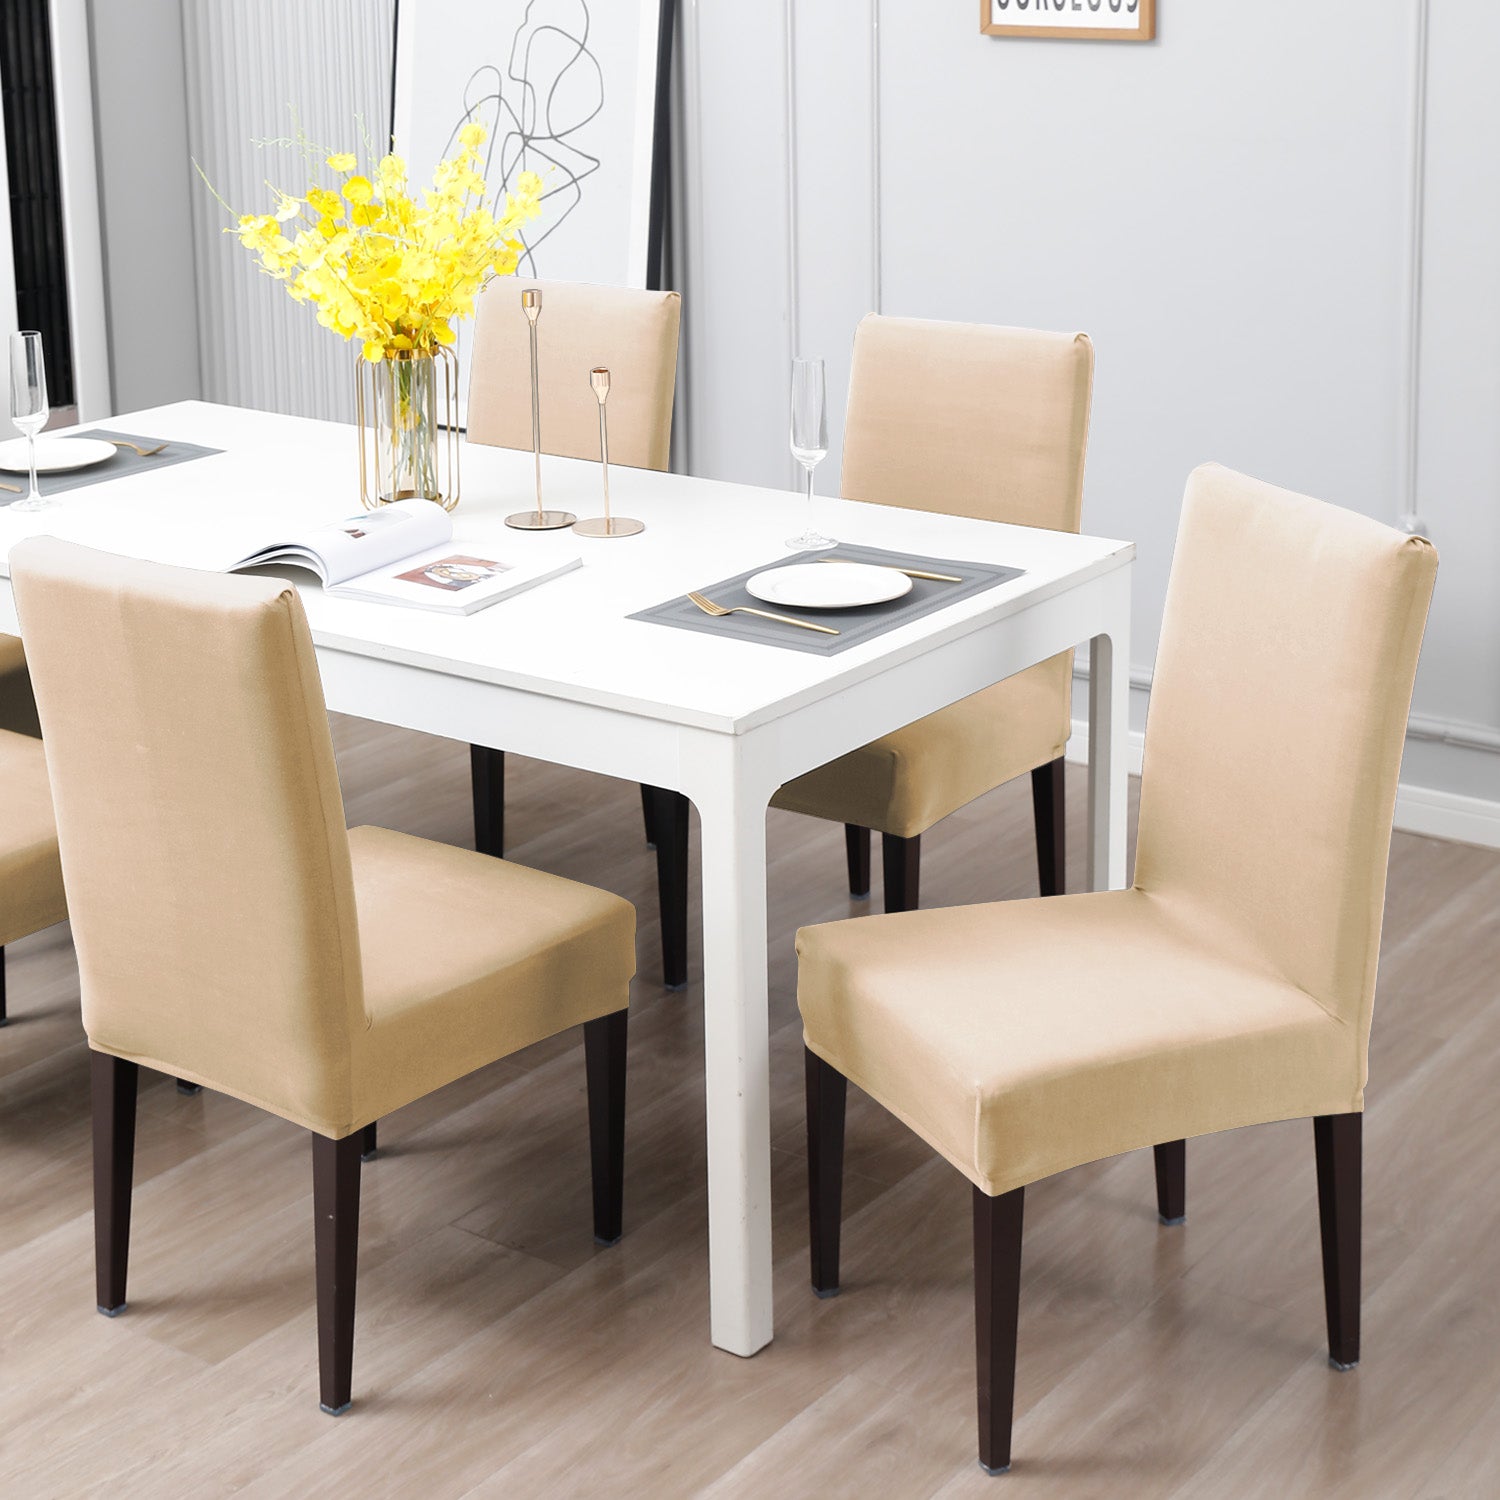 Elastic Stretchable Dining Chair Cover, Beige